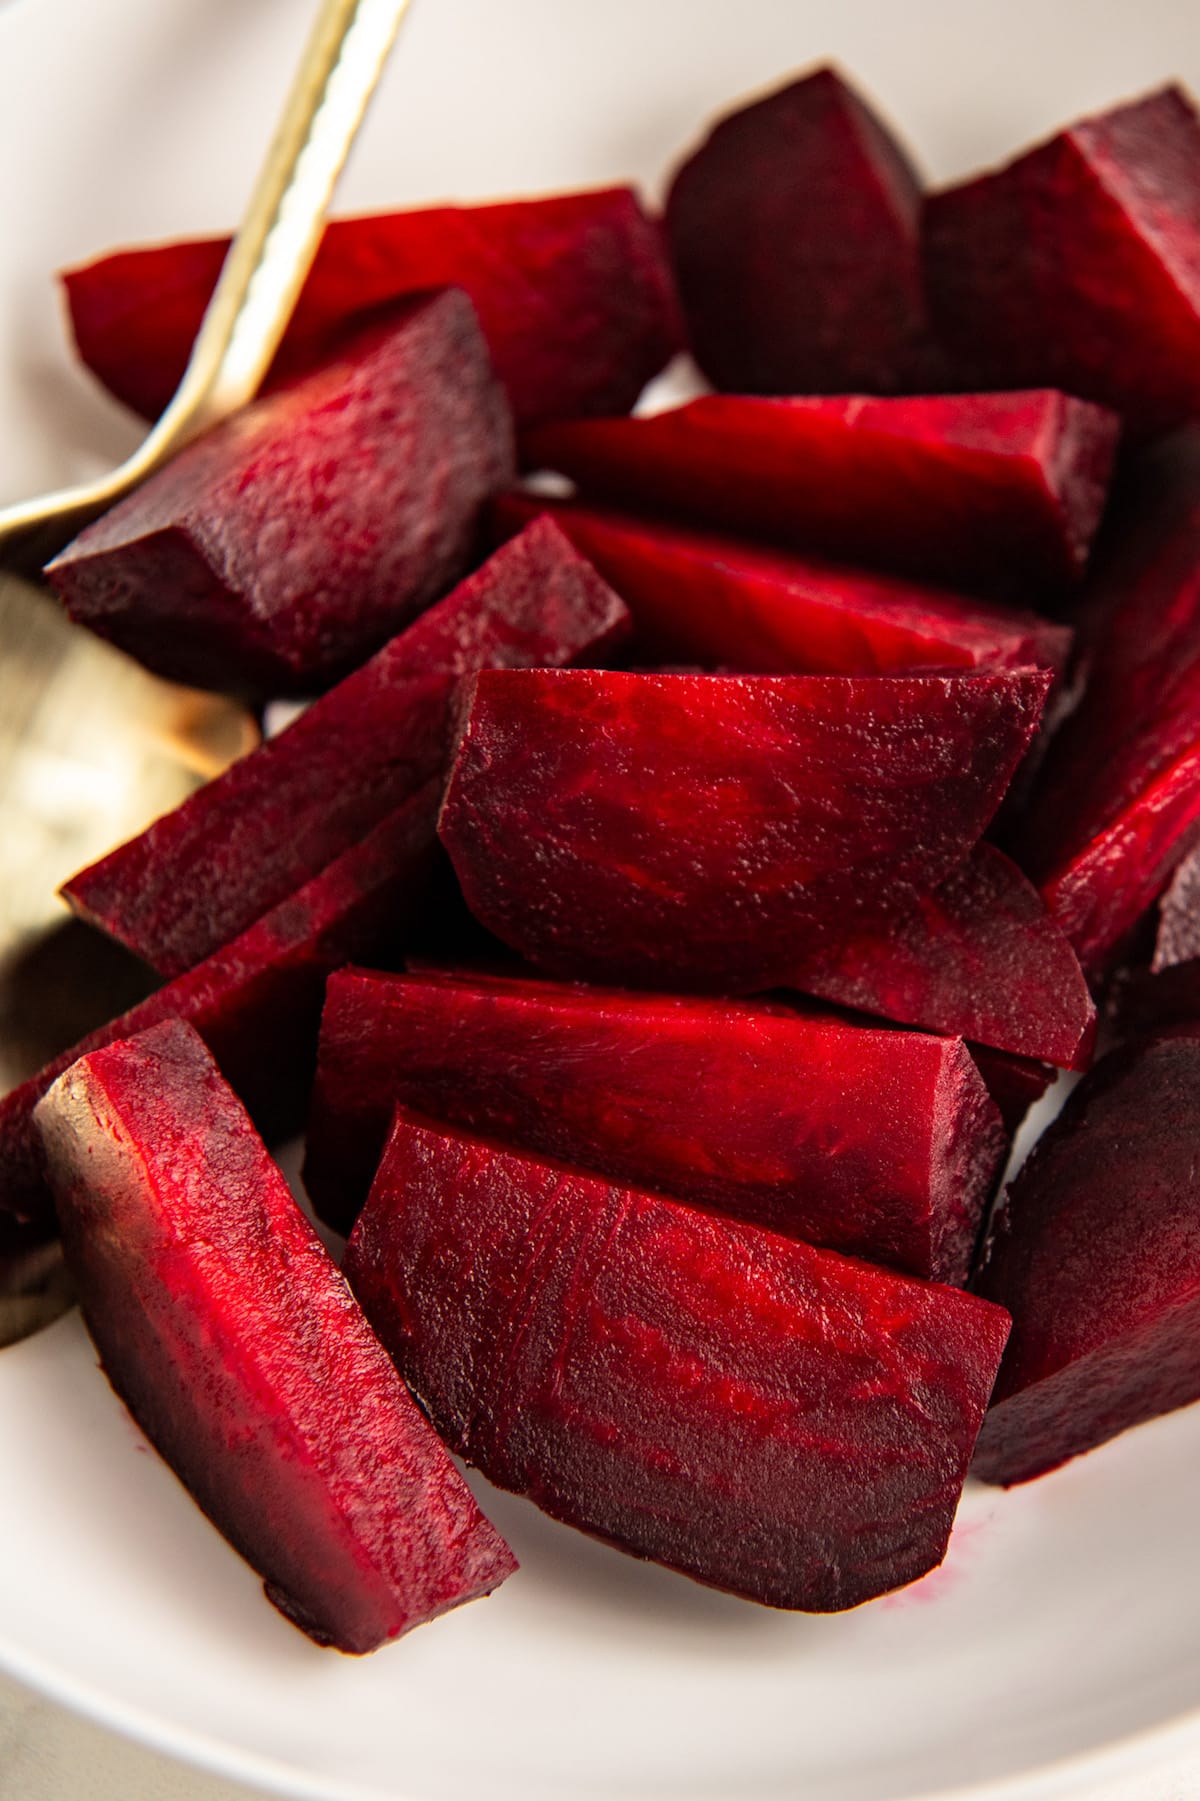 Cut up beets on a white plate.